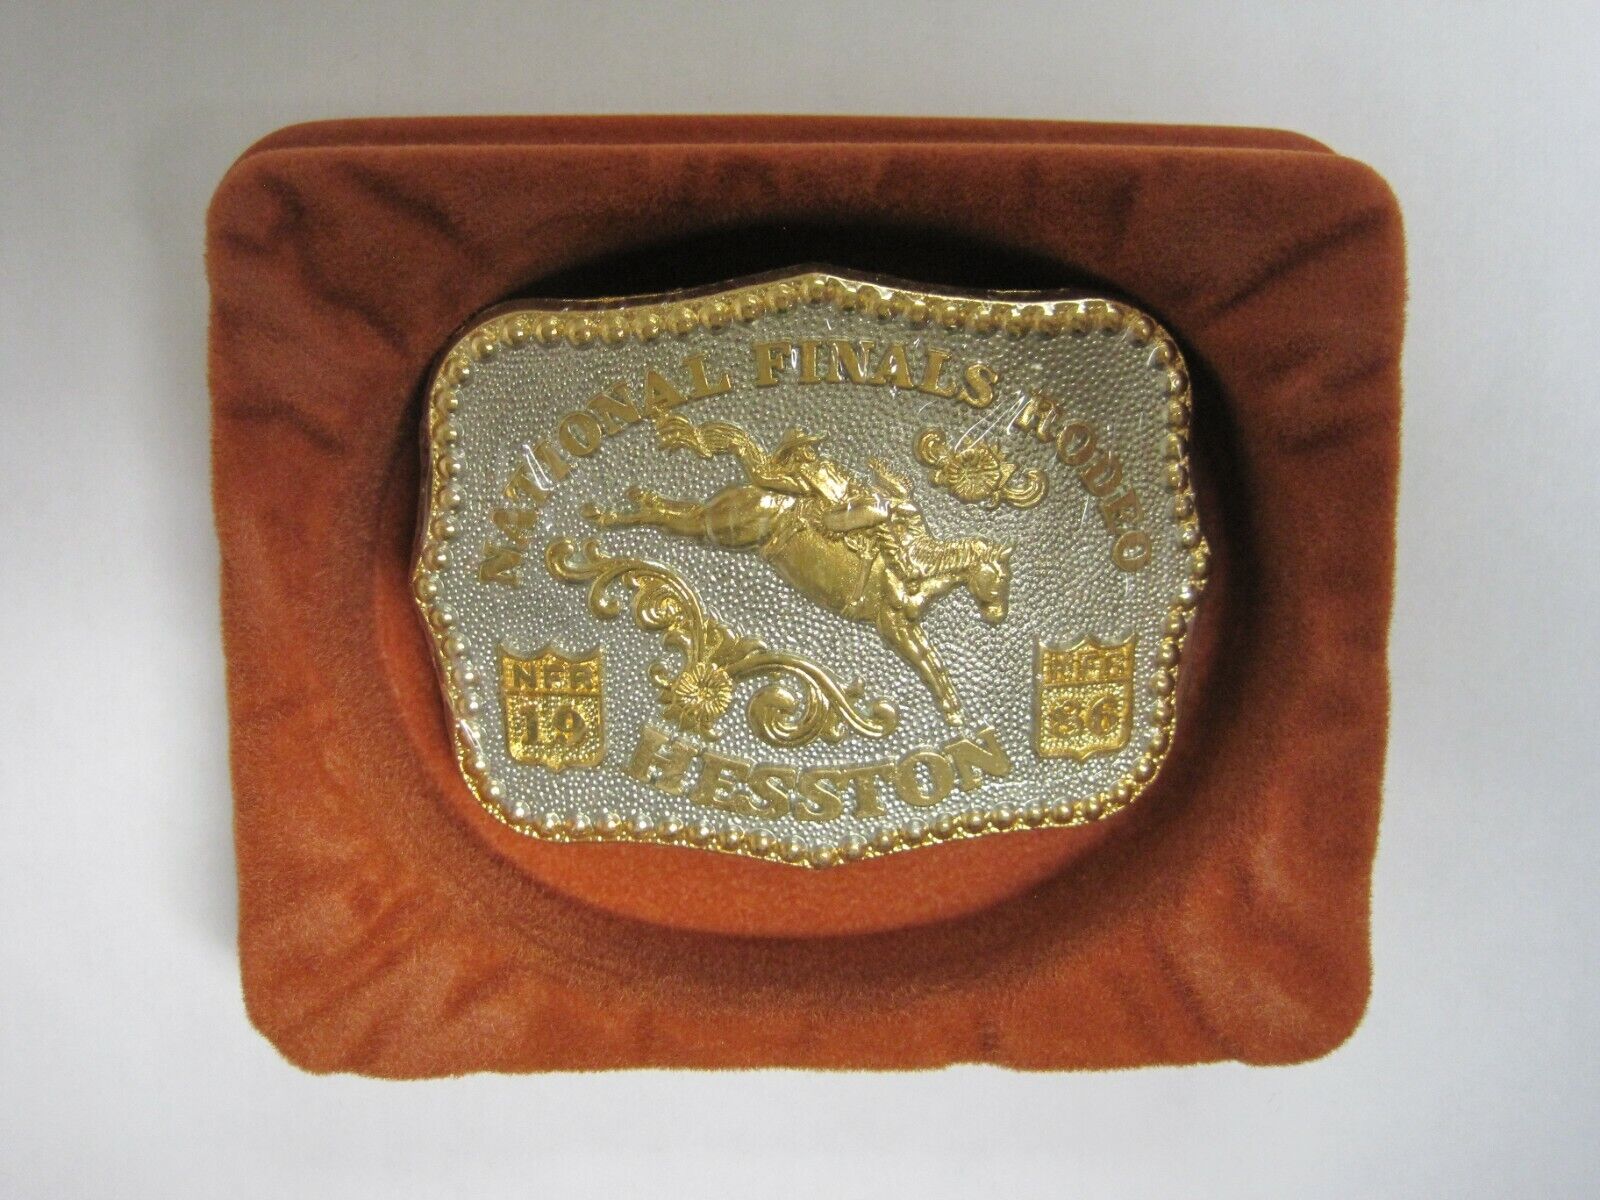 24KT GOLD PLATE Hesston Gold & Silver 1986 NFR Miniature Rodeo Buckle, orig box